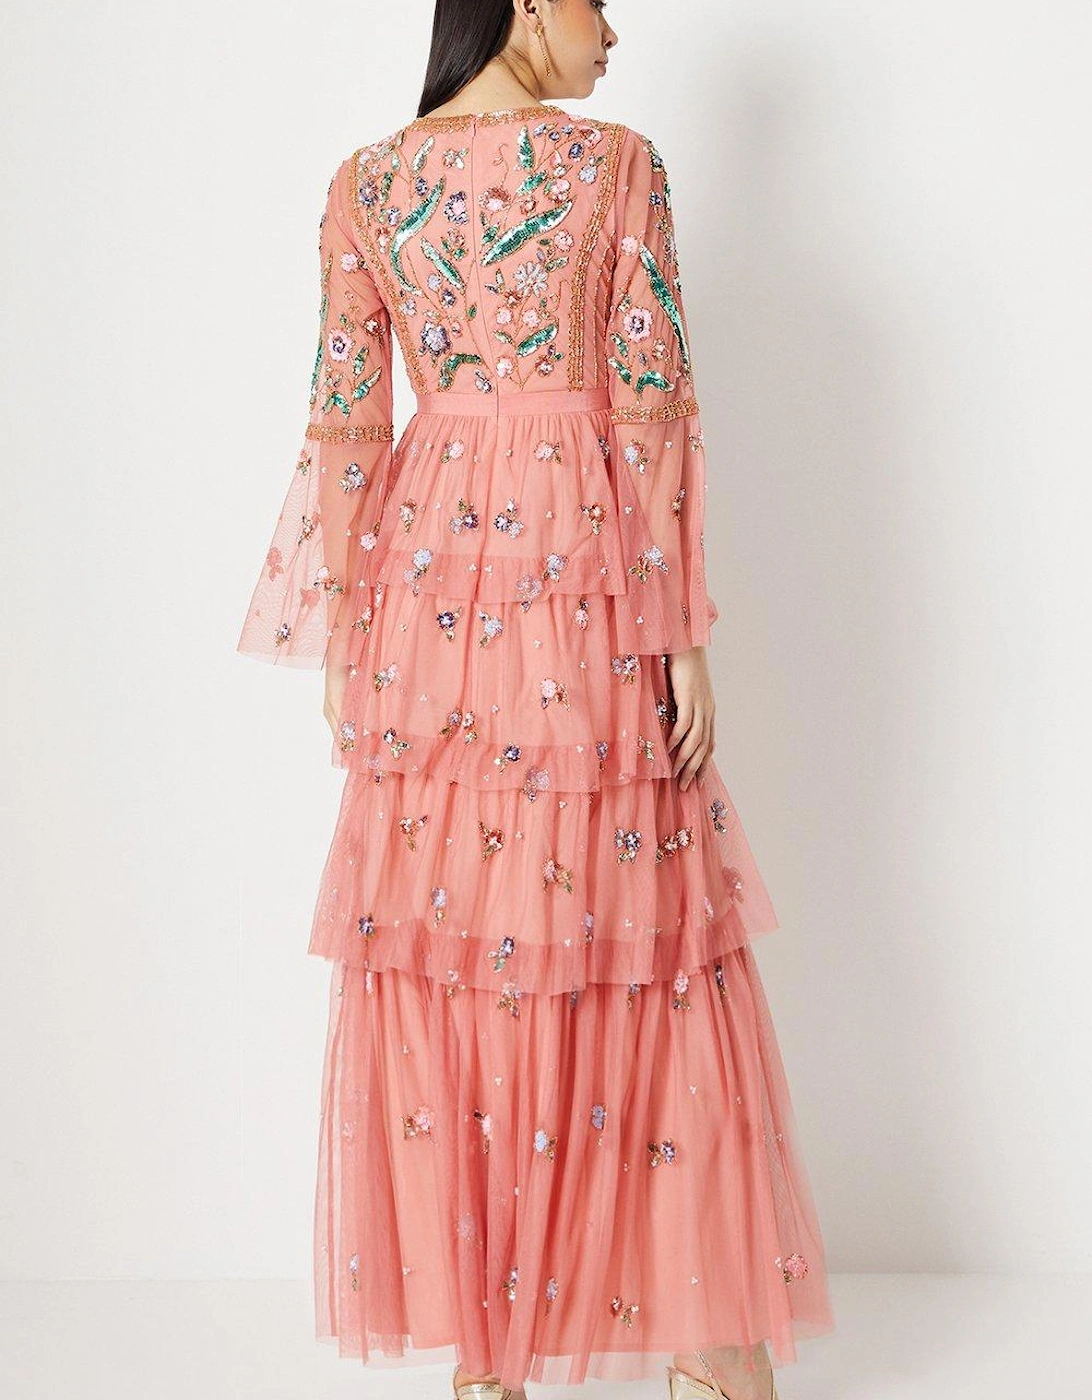 Hand Embellished Tiered Skirt Maxi Dress